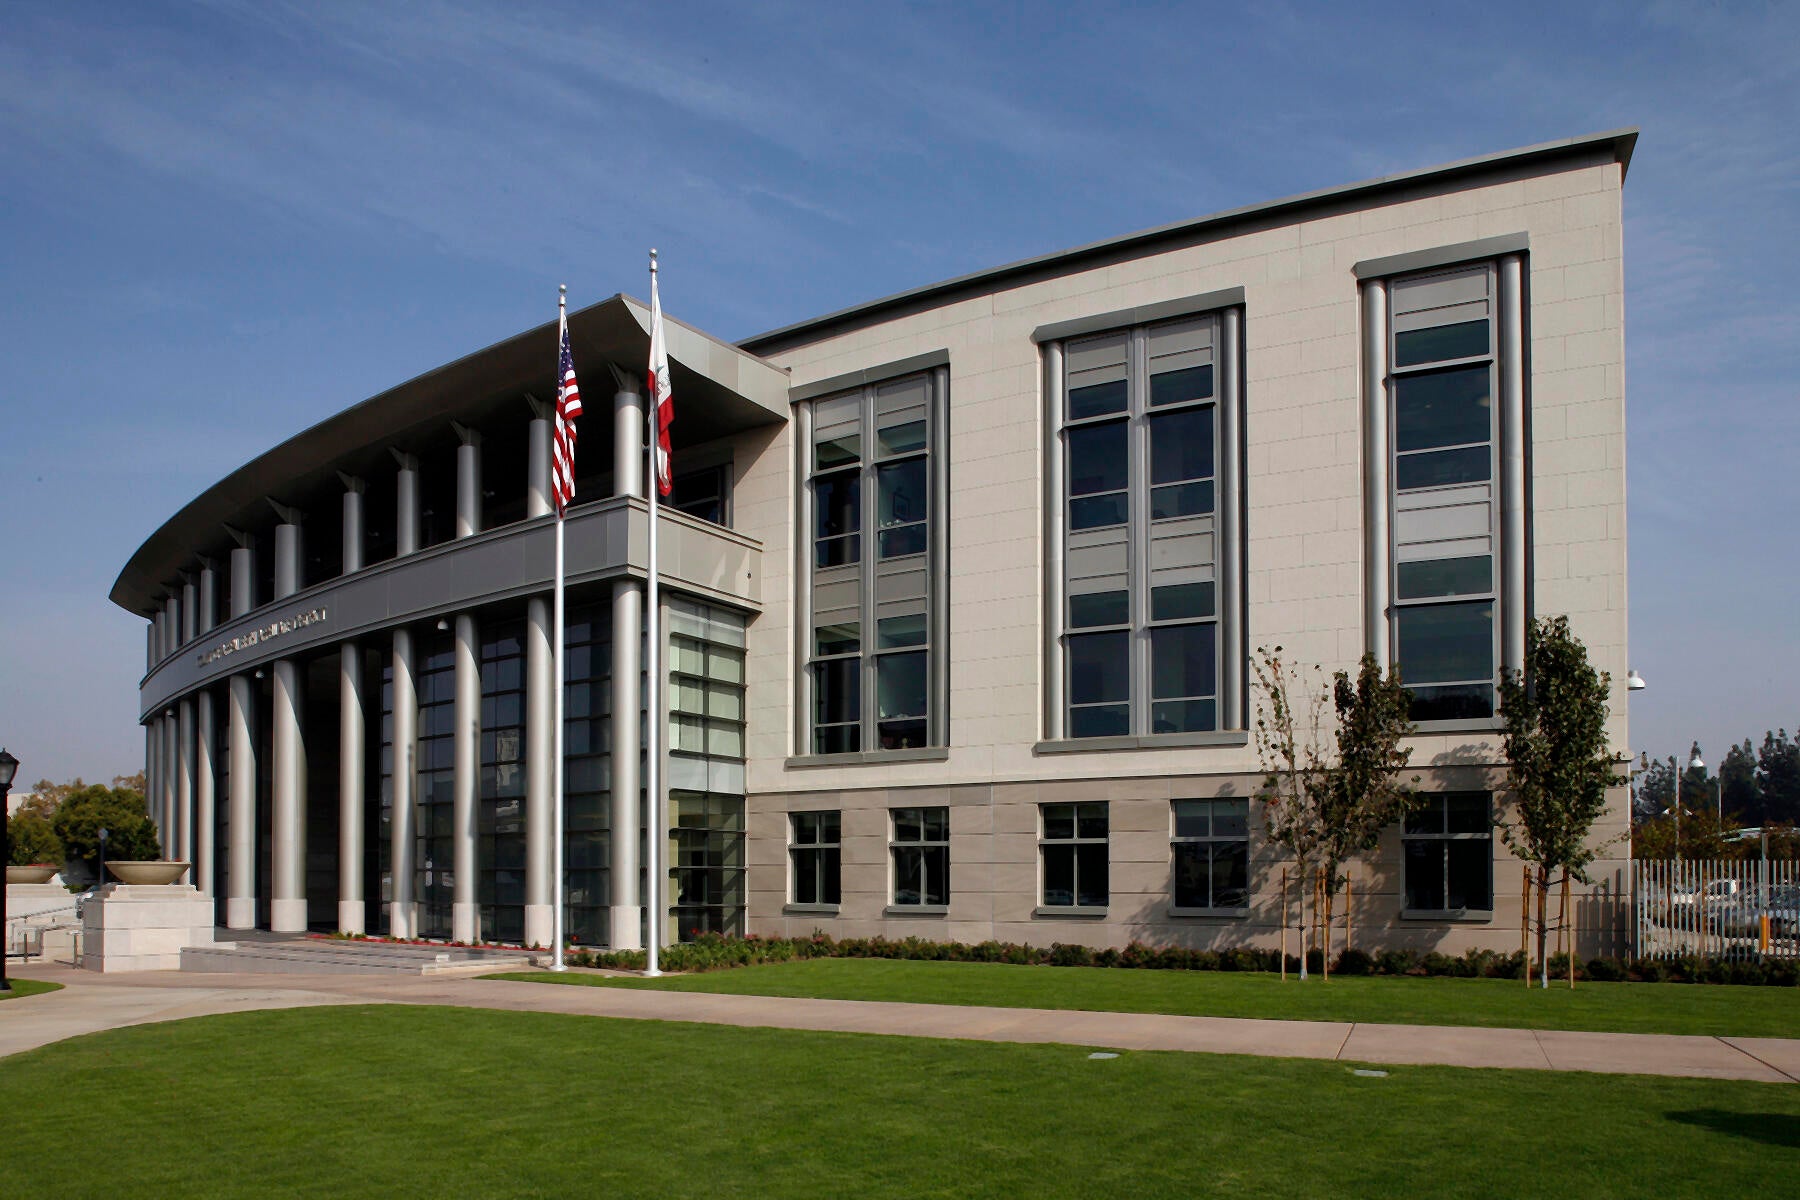 Fifth District Court of Appeal, Fresno